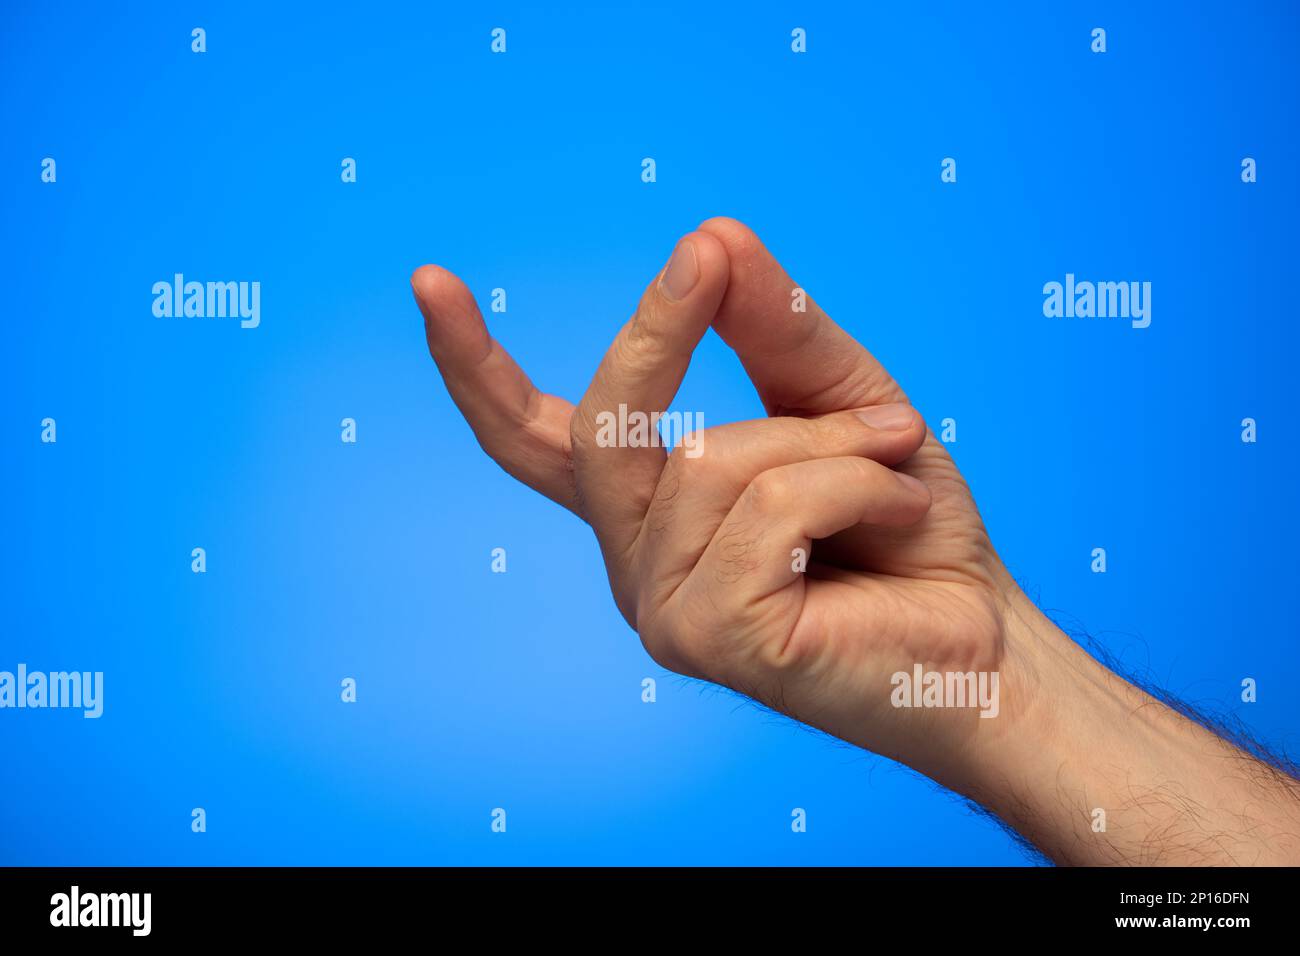 Caucasian male hand making a finger snap gesture studio shot isolated on blue background. Stock Photo